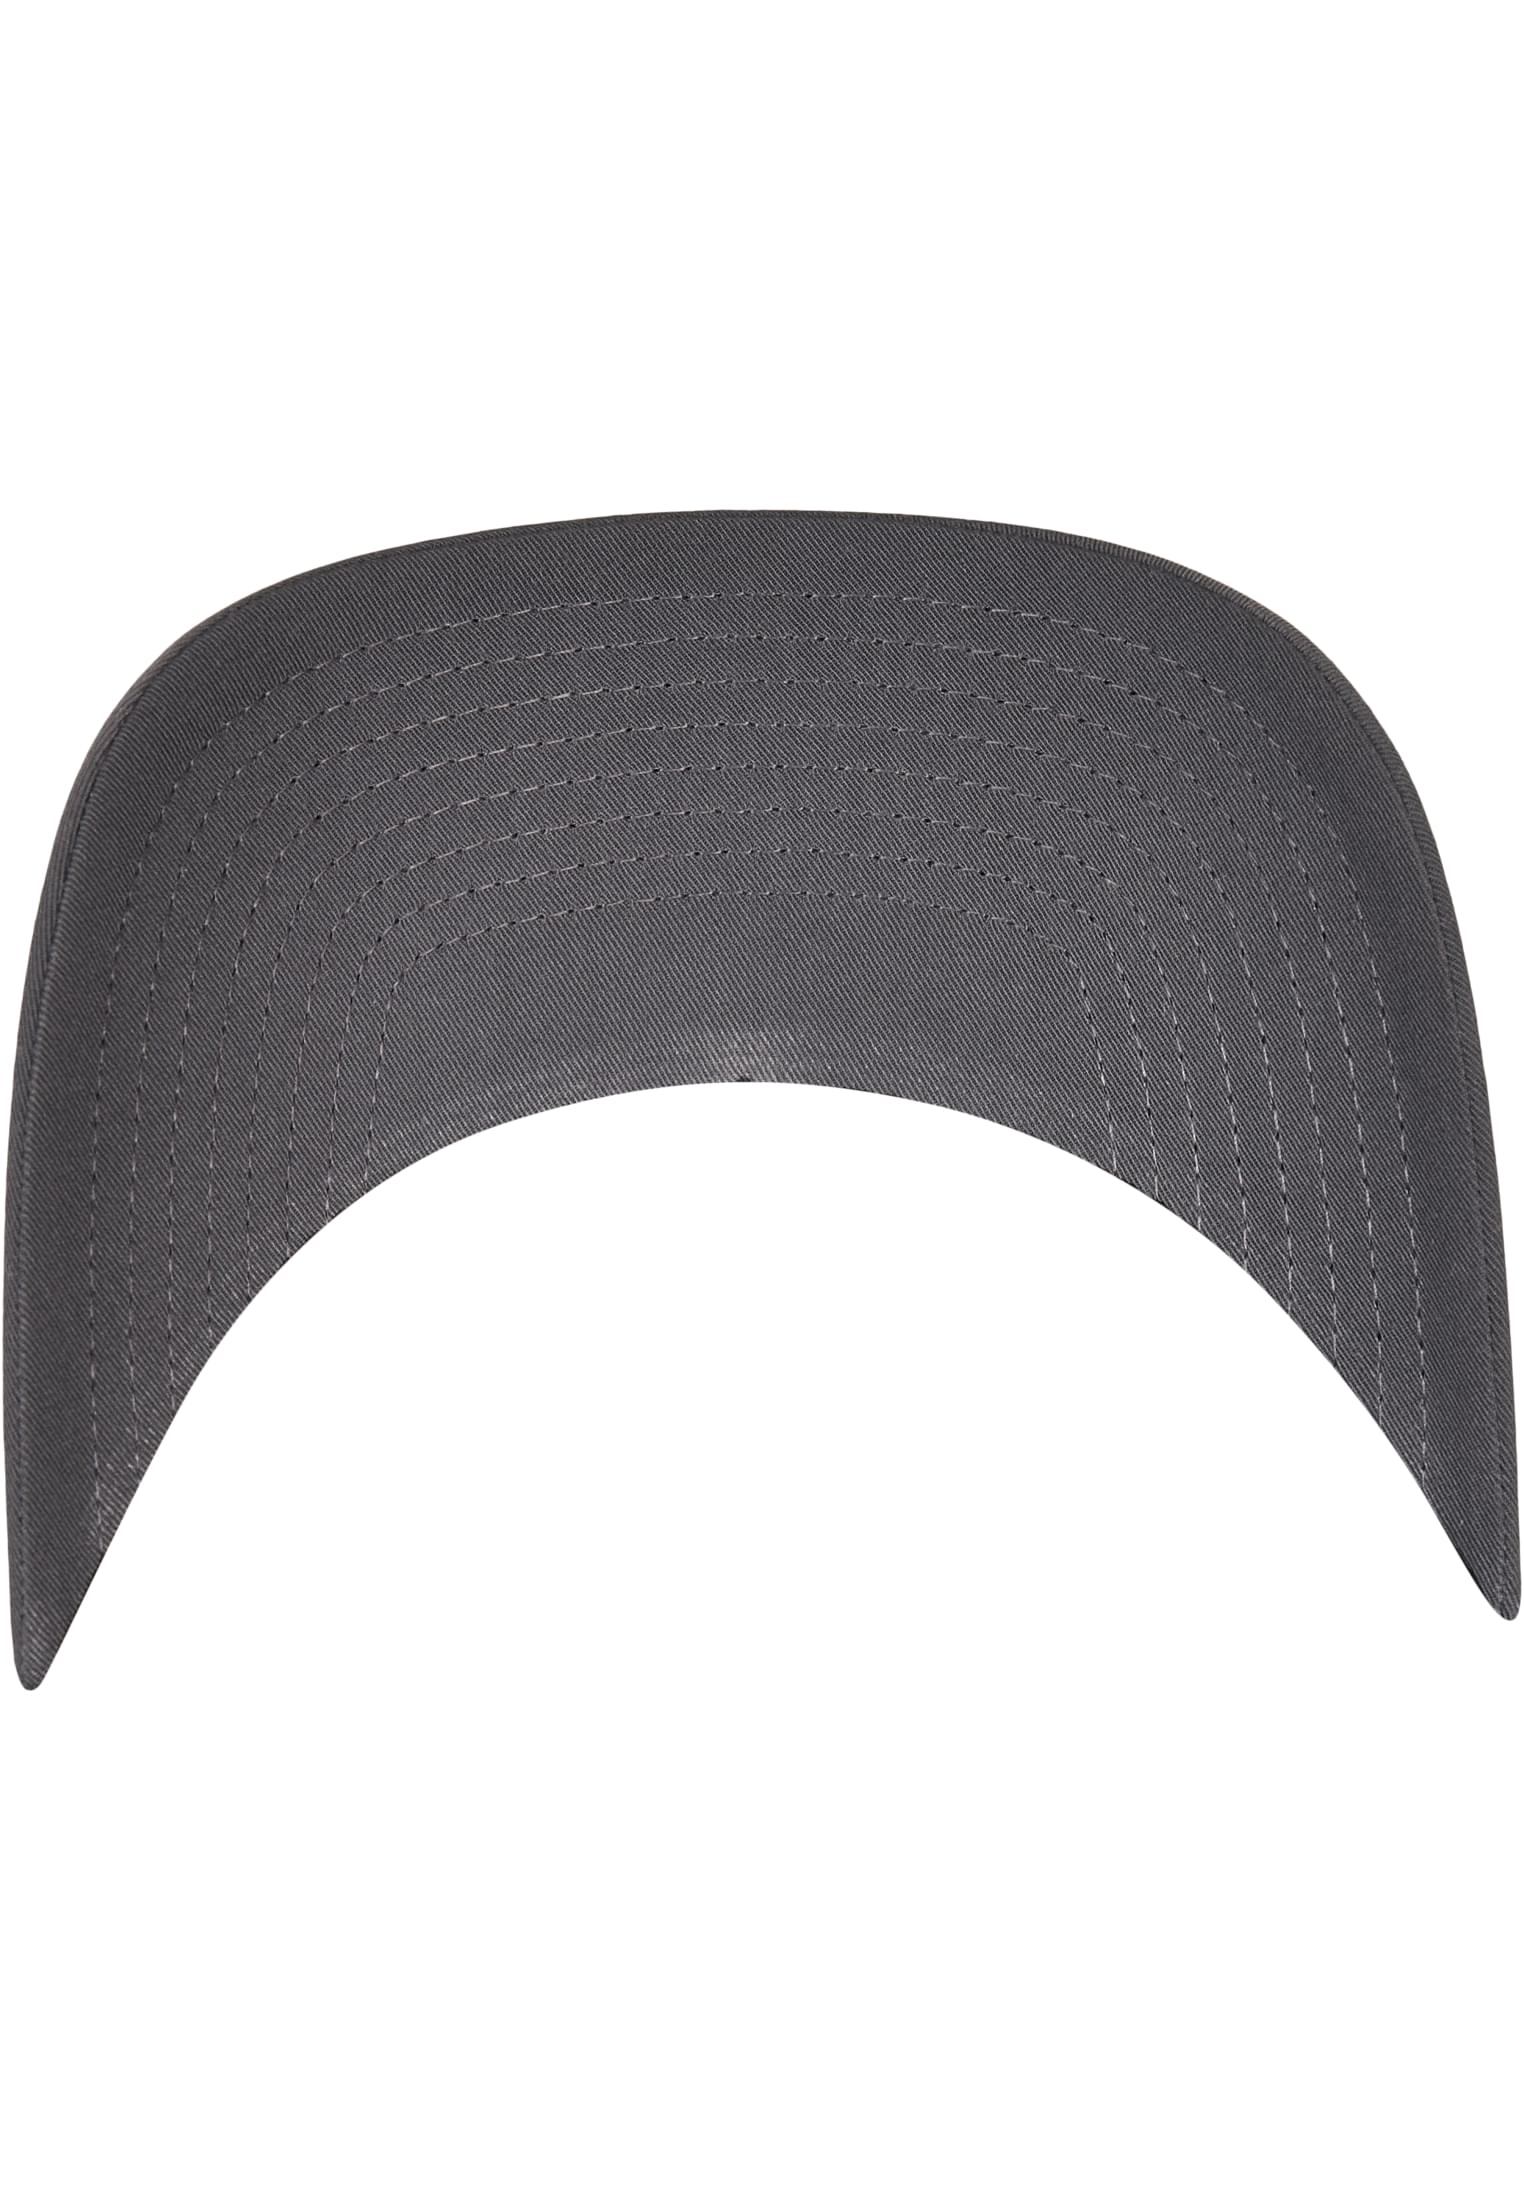 Flexfit Recycled Cap-6277RP Polyester